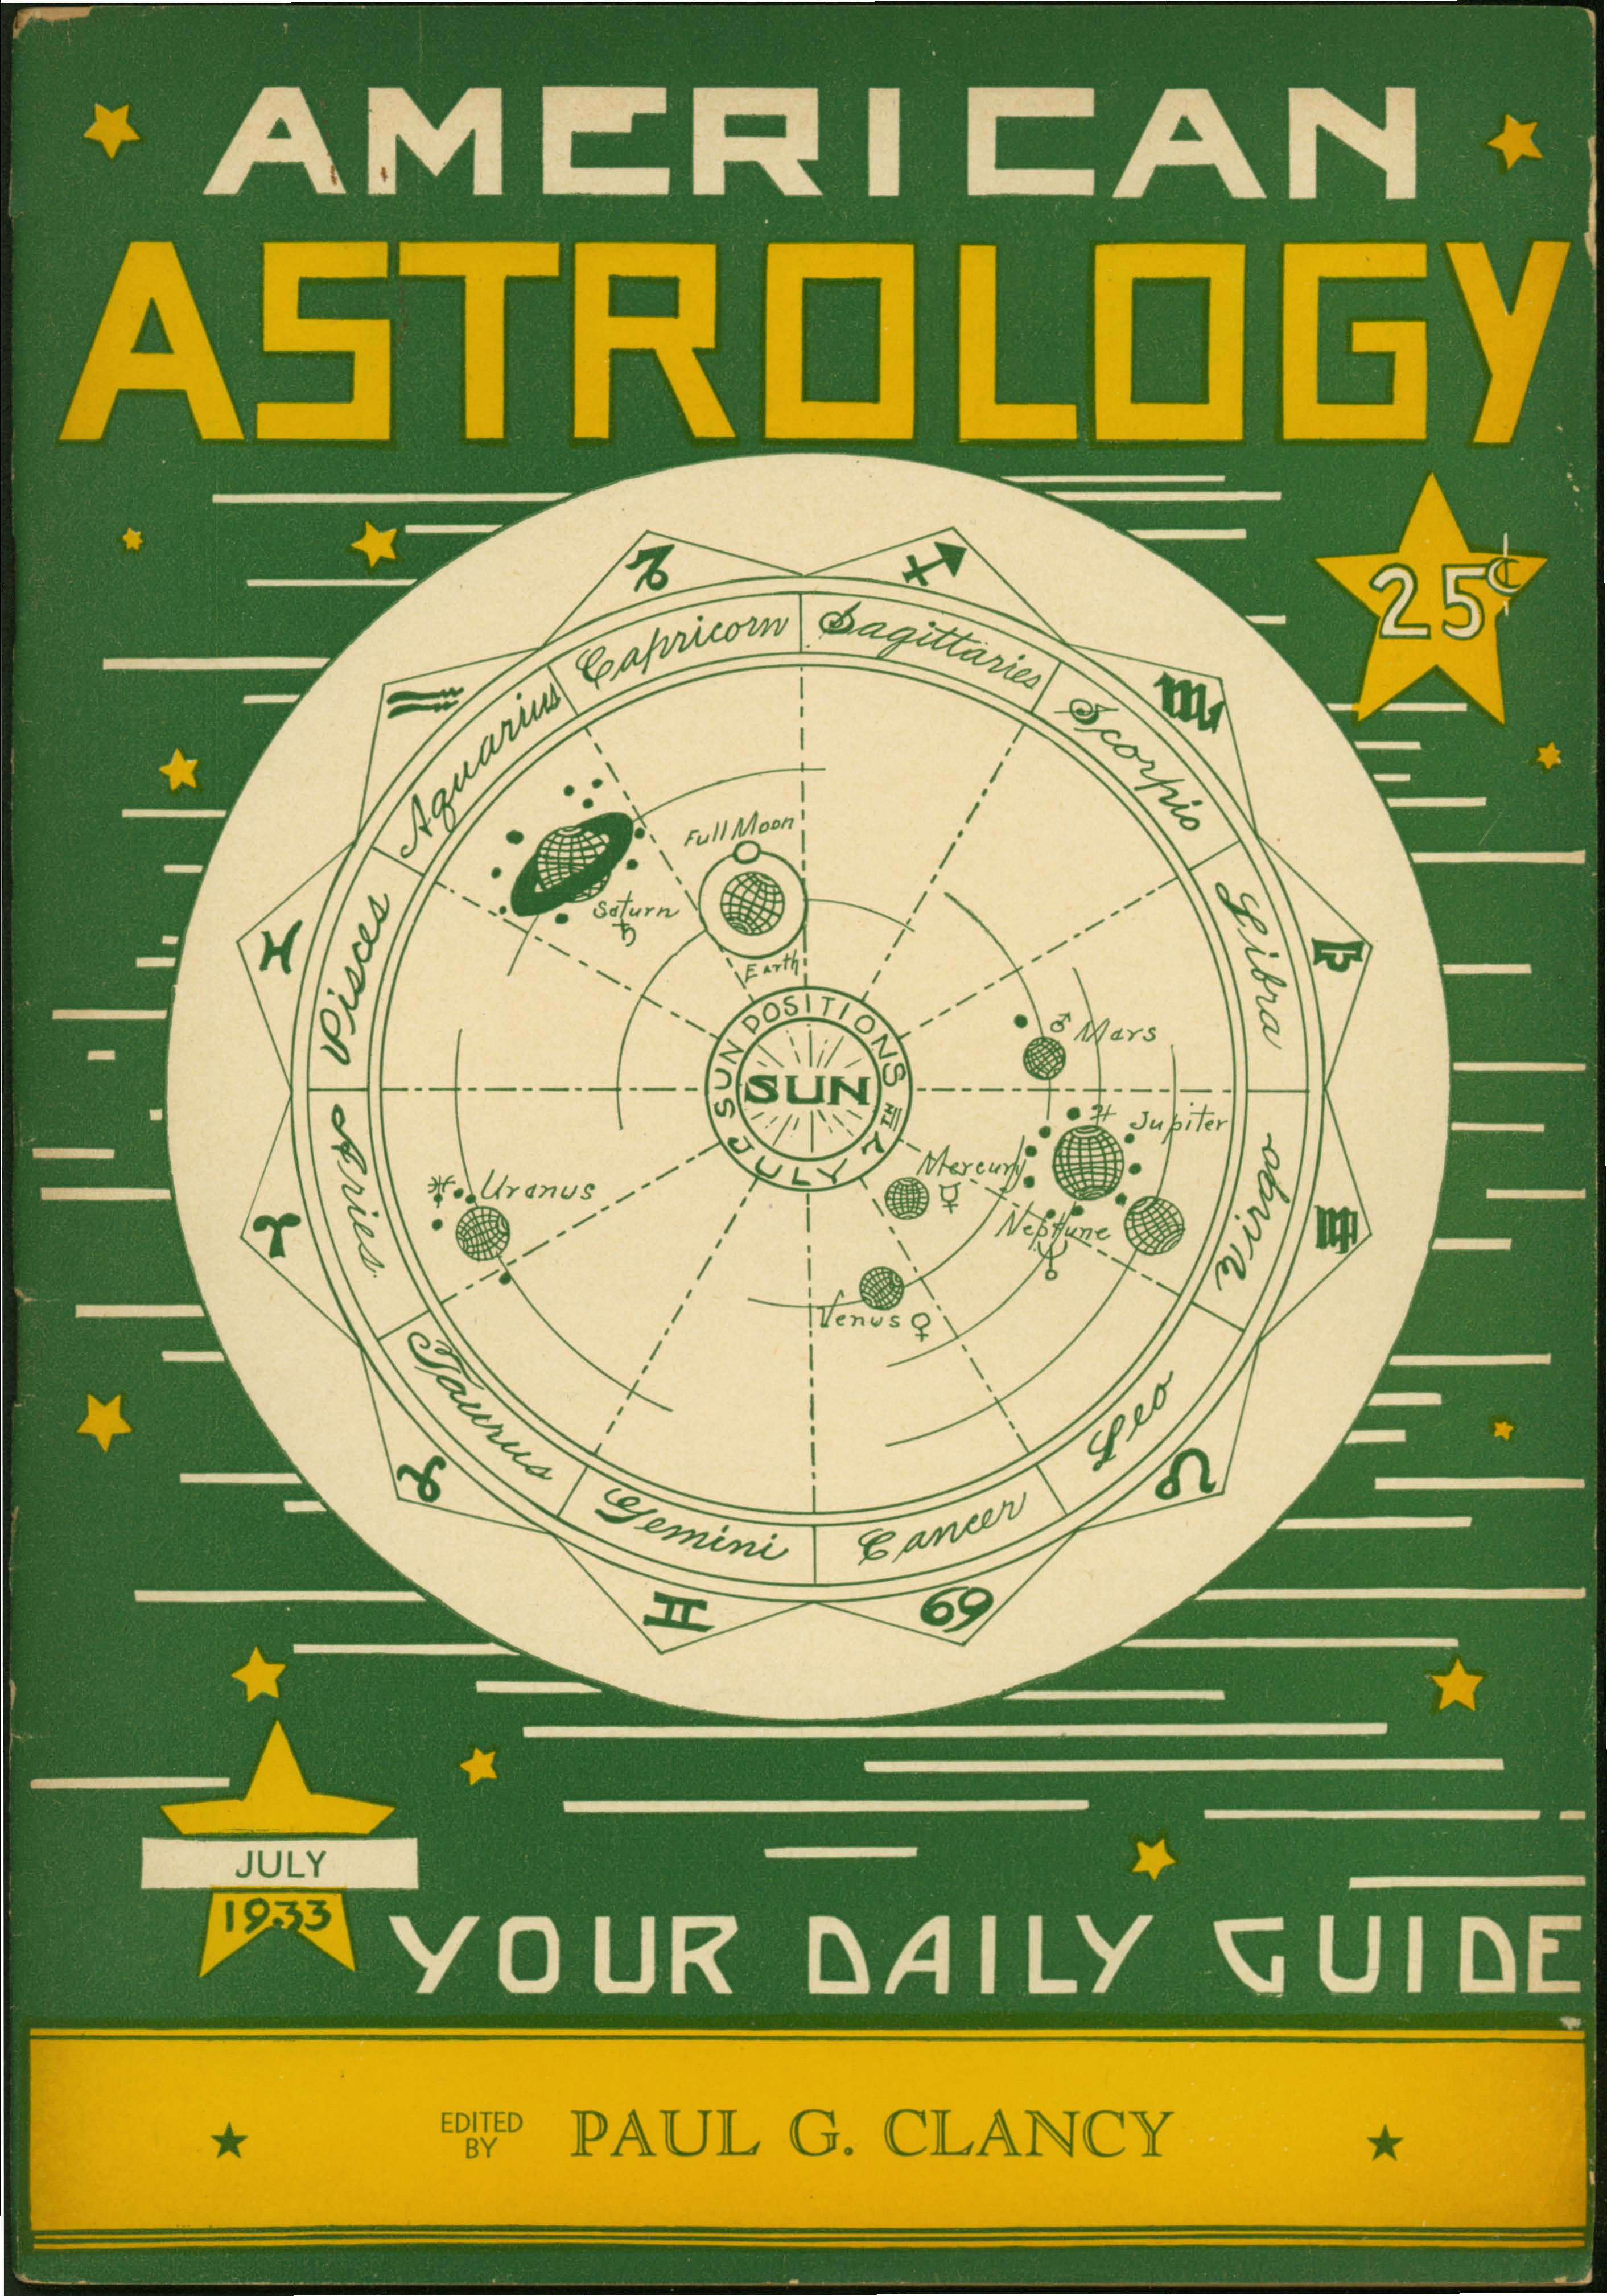 American Astrology 1933 covers_Page_3